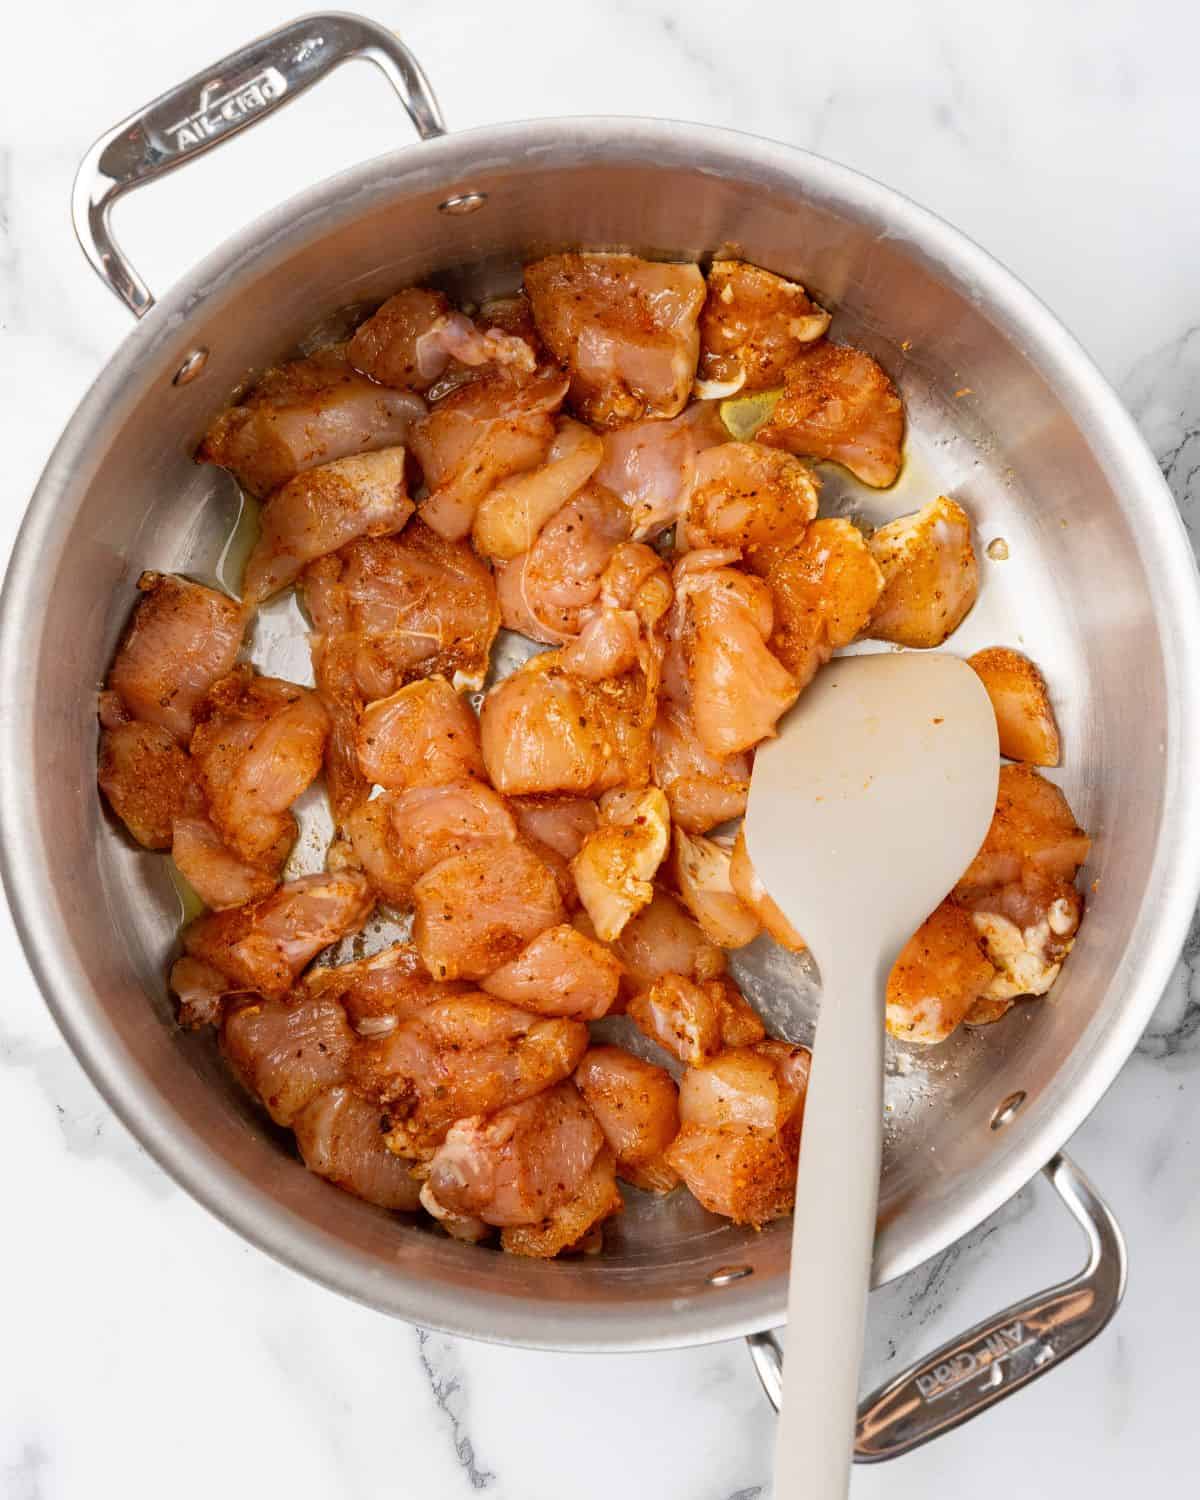 cajun chicken being cooked in a large pot.